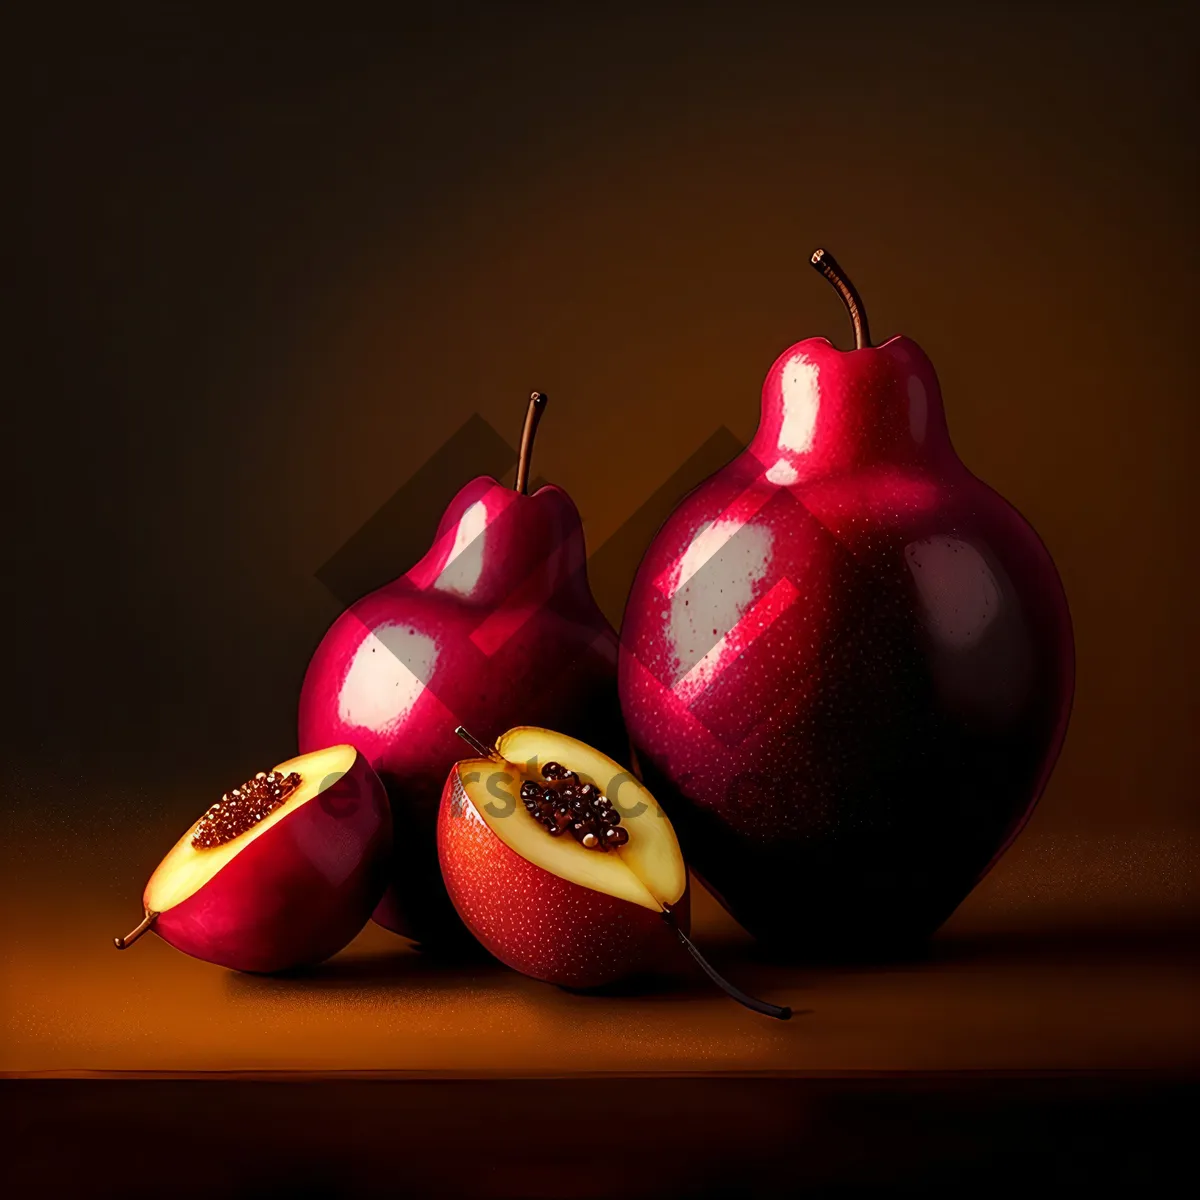 Picture of Fresh, Juicy Red Delicious Apple - Healthy and Delicious Fruit